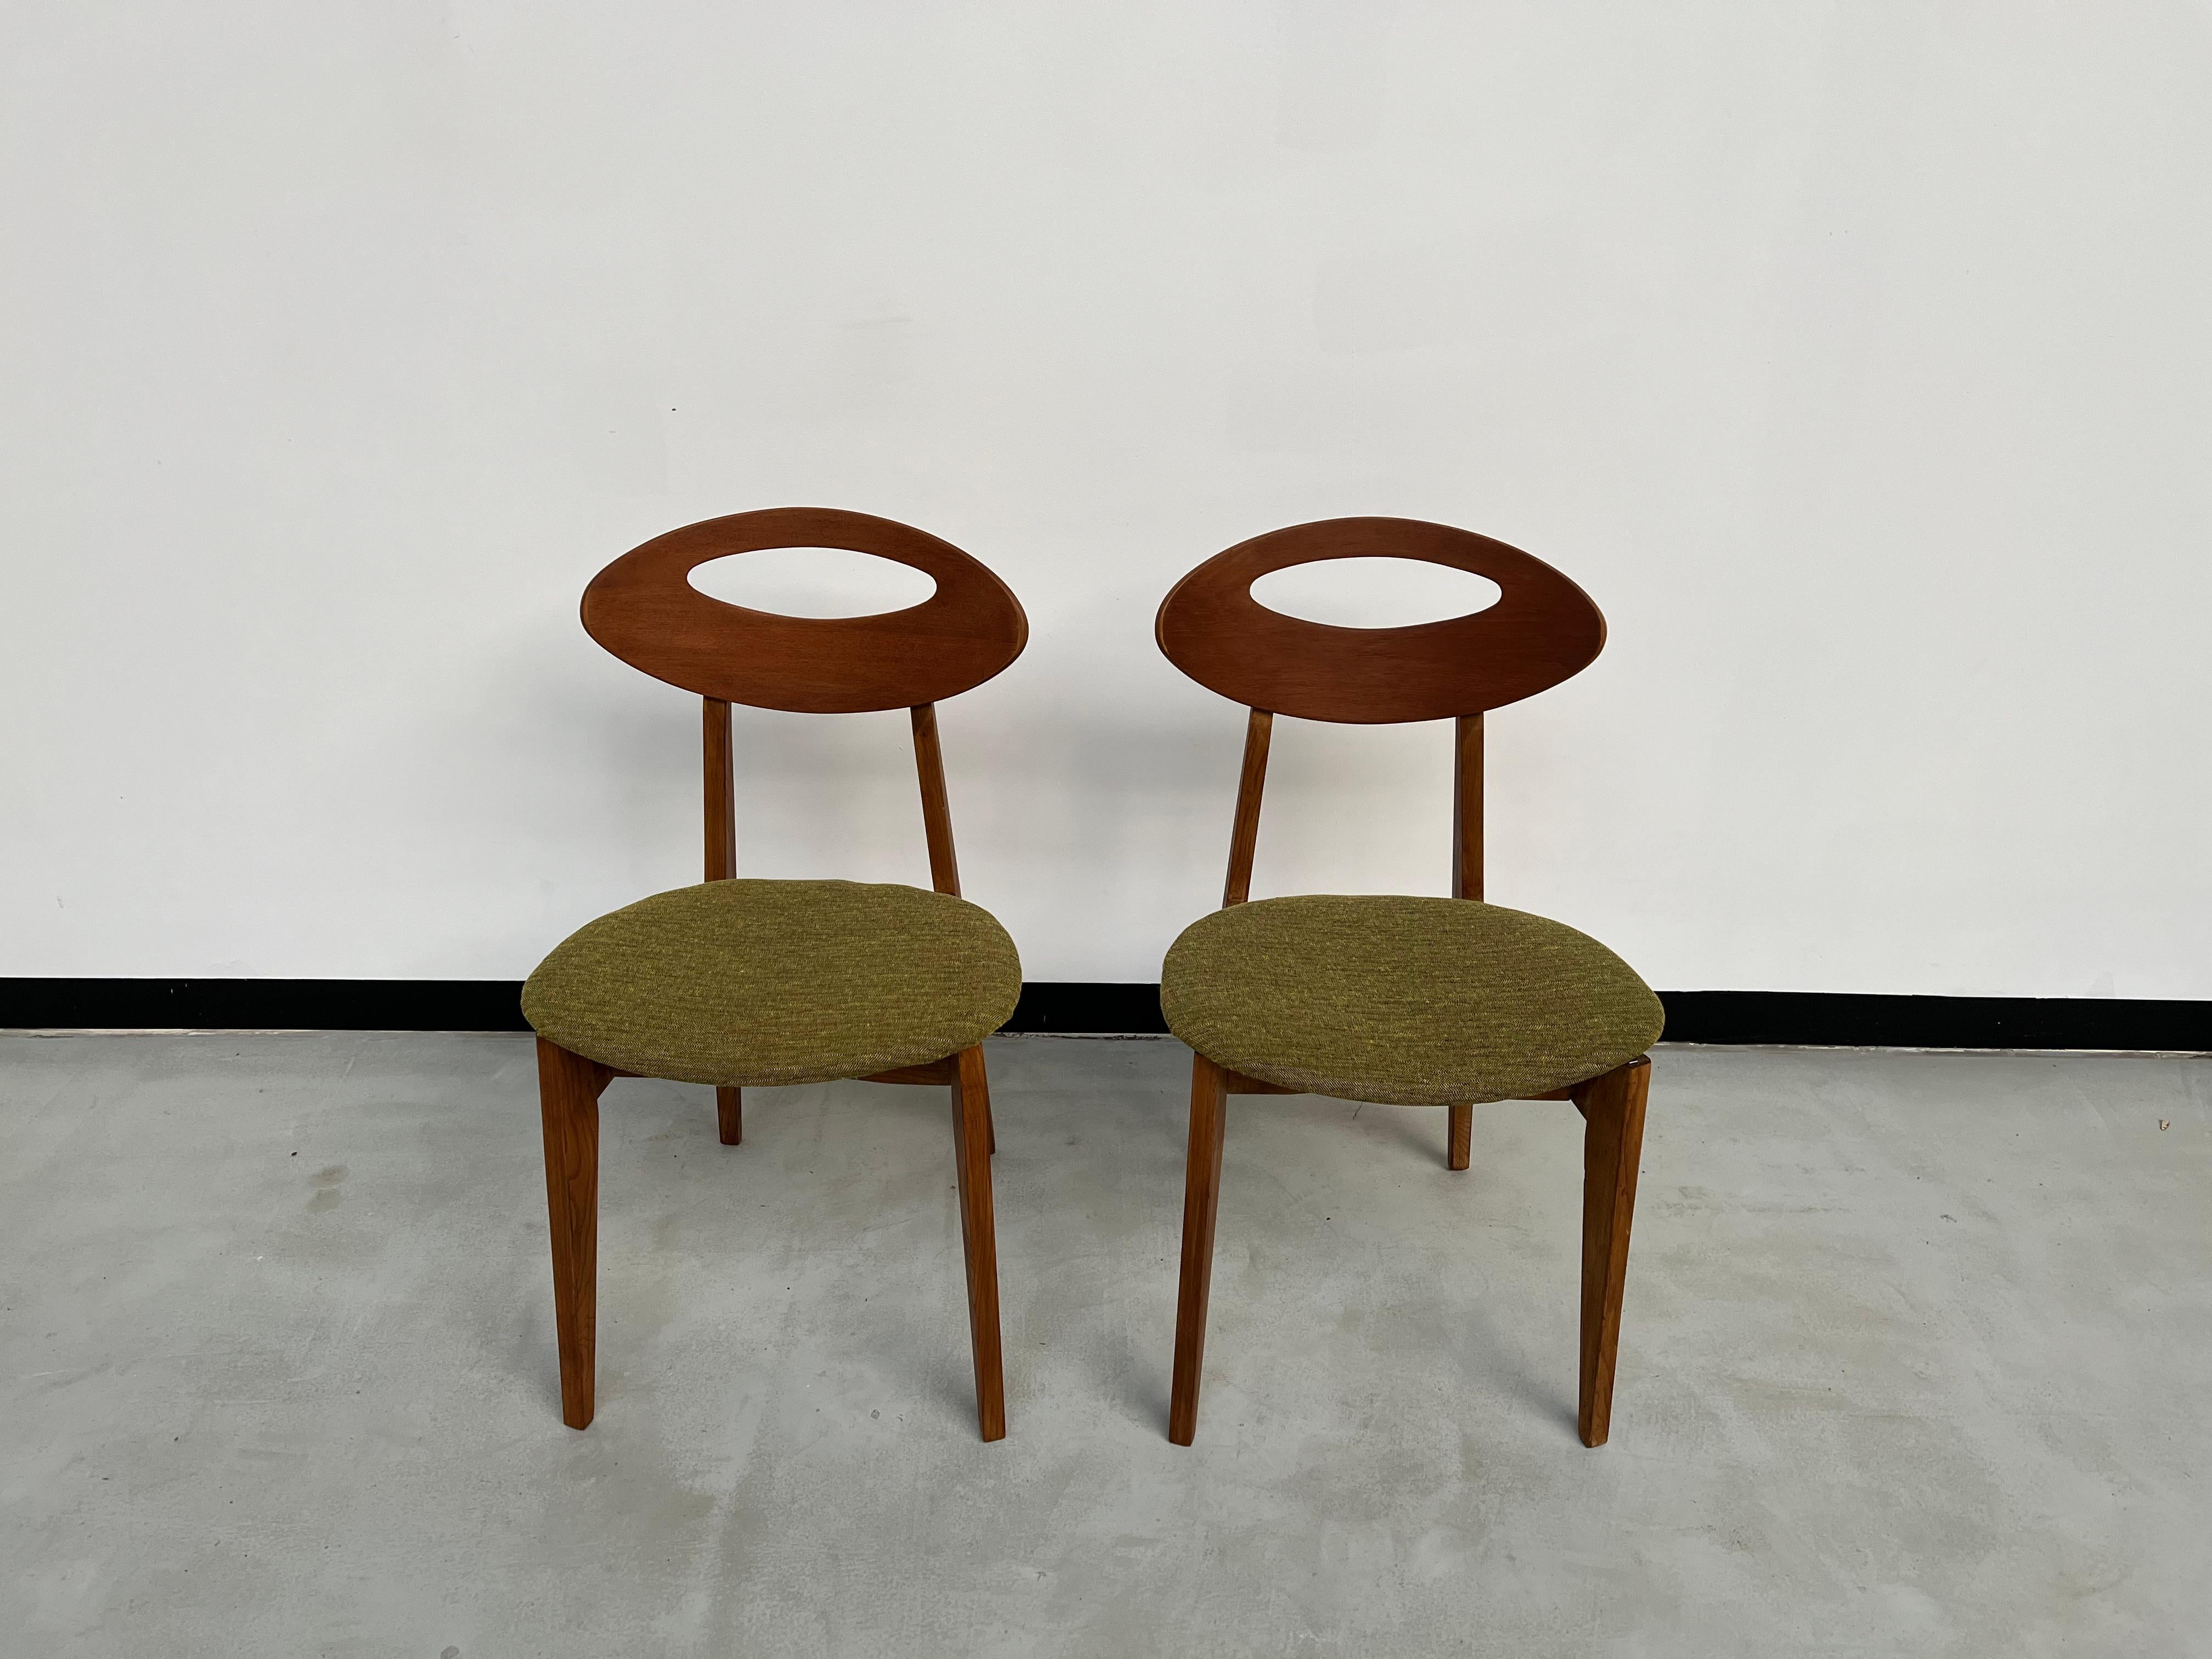  Duo of Roger Landault chairs for Sentou, France 50's 10